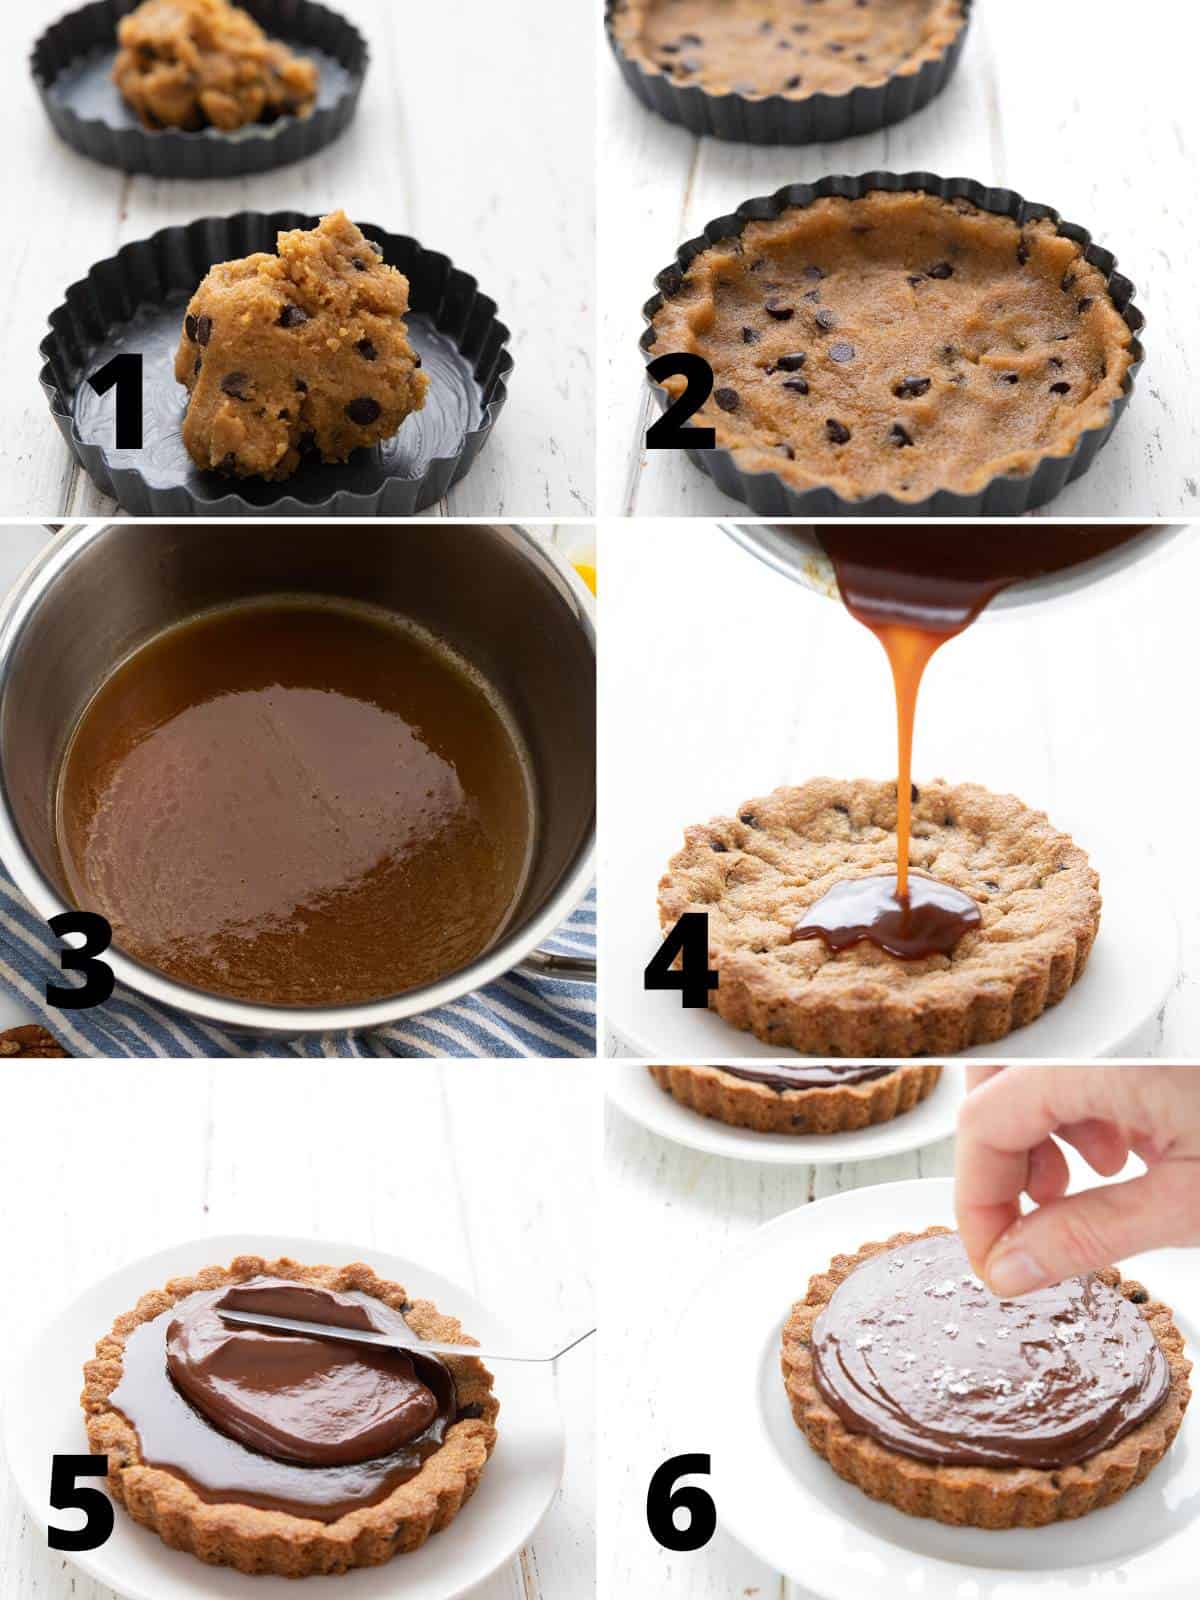 A collage of 6 images showing how to make Keto Caramel Tarts.